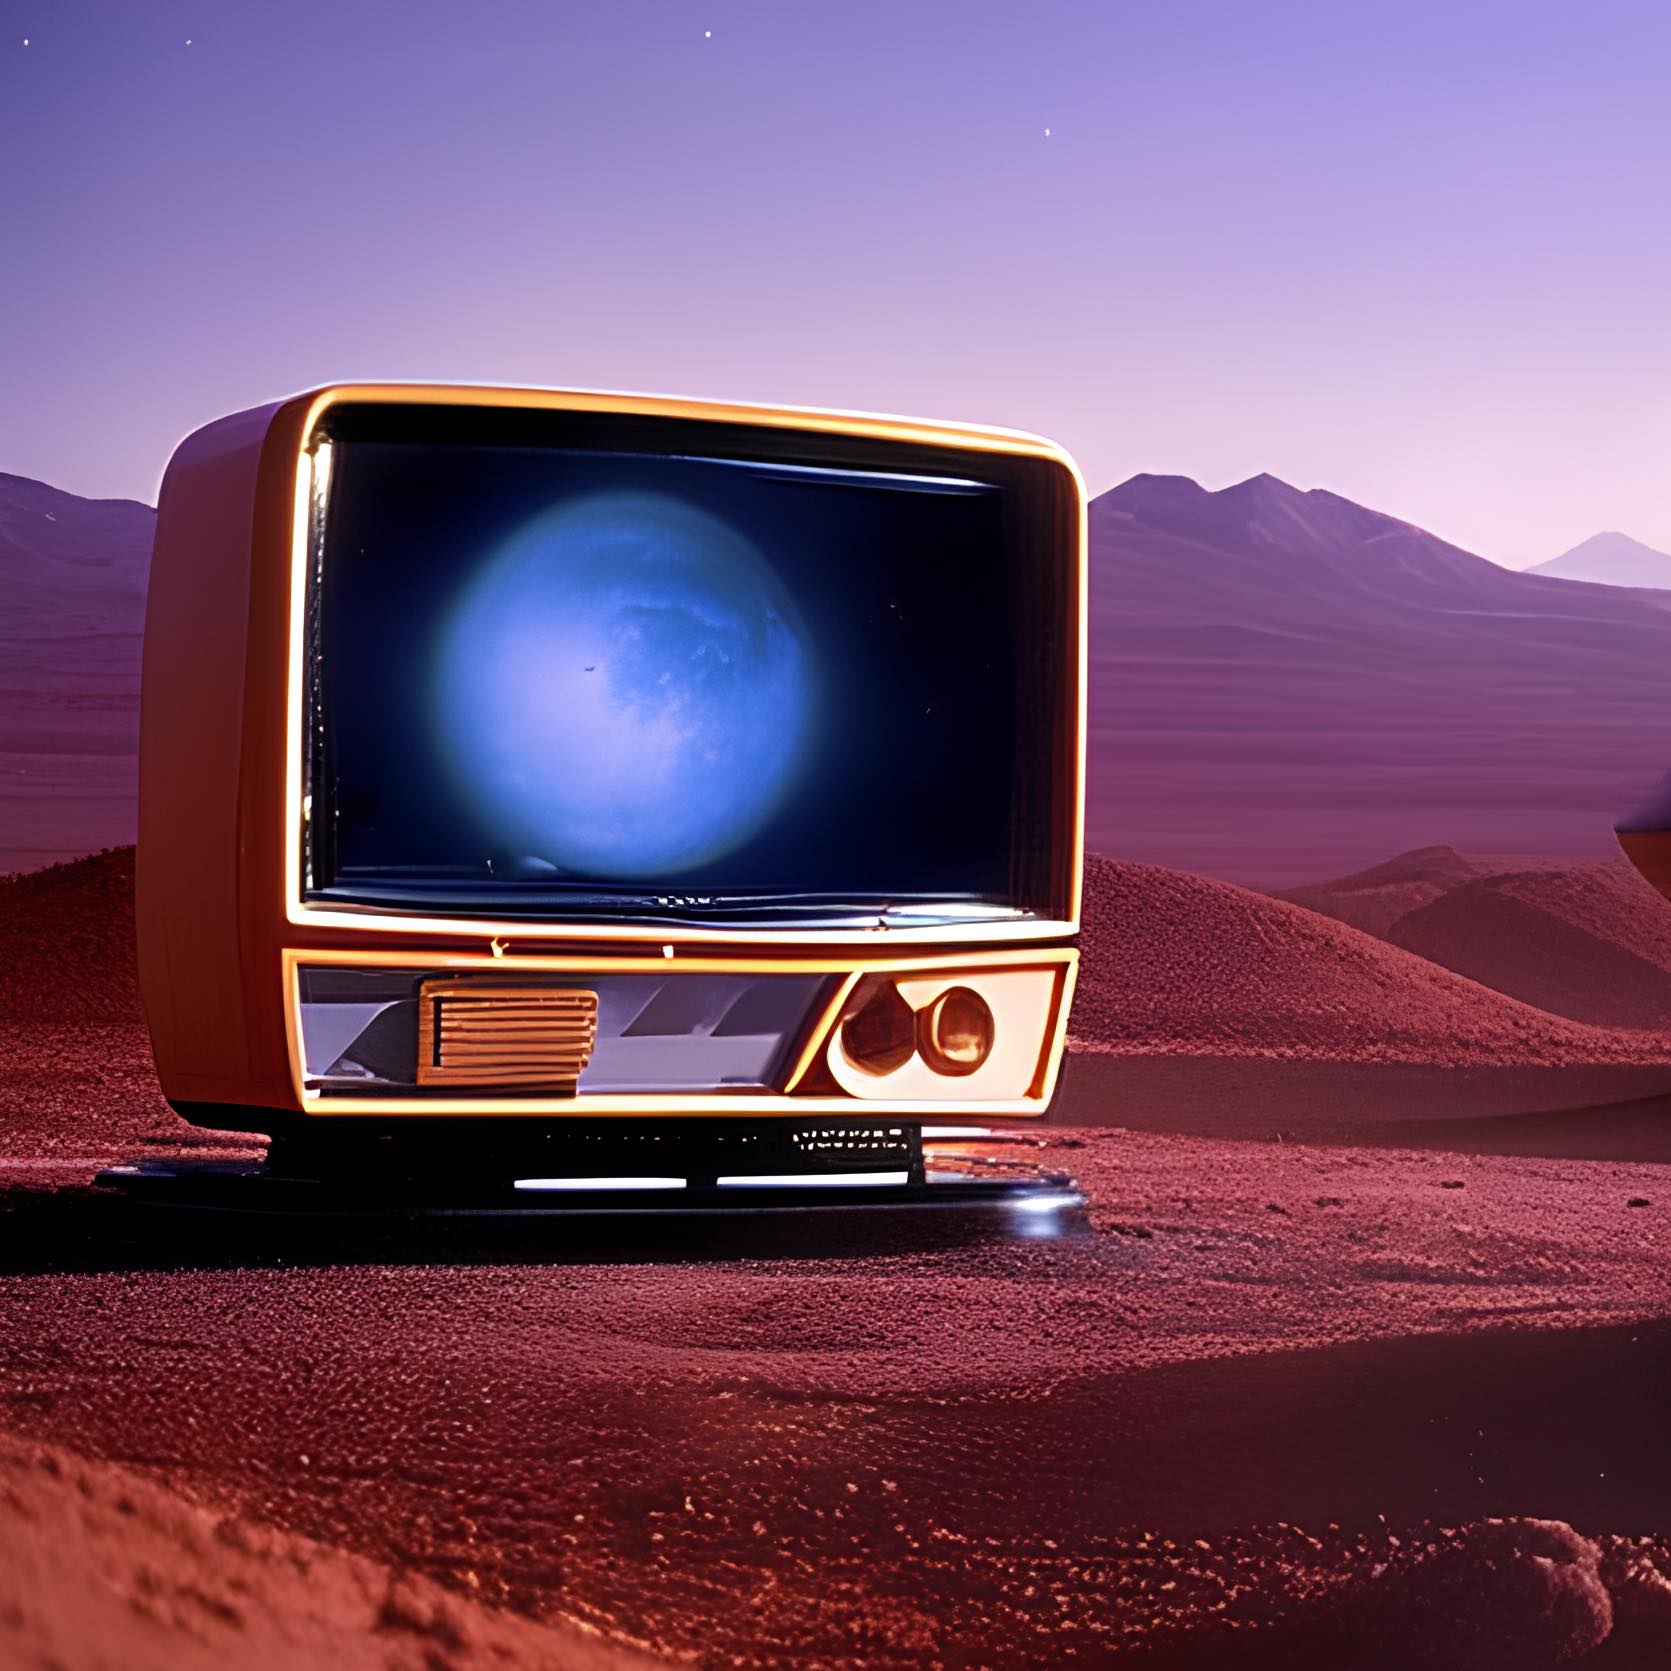 Sci fi old television on Mars planet